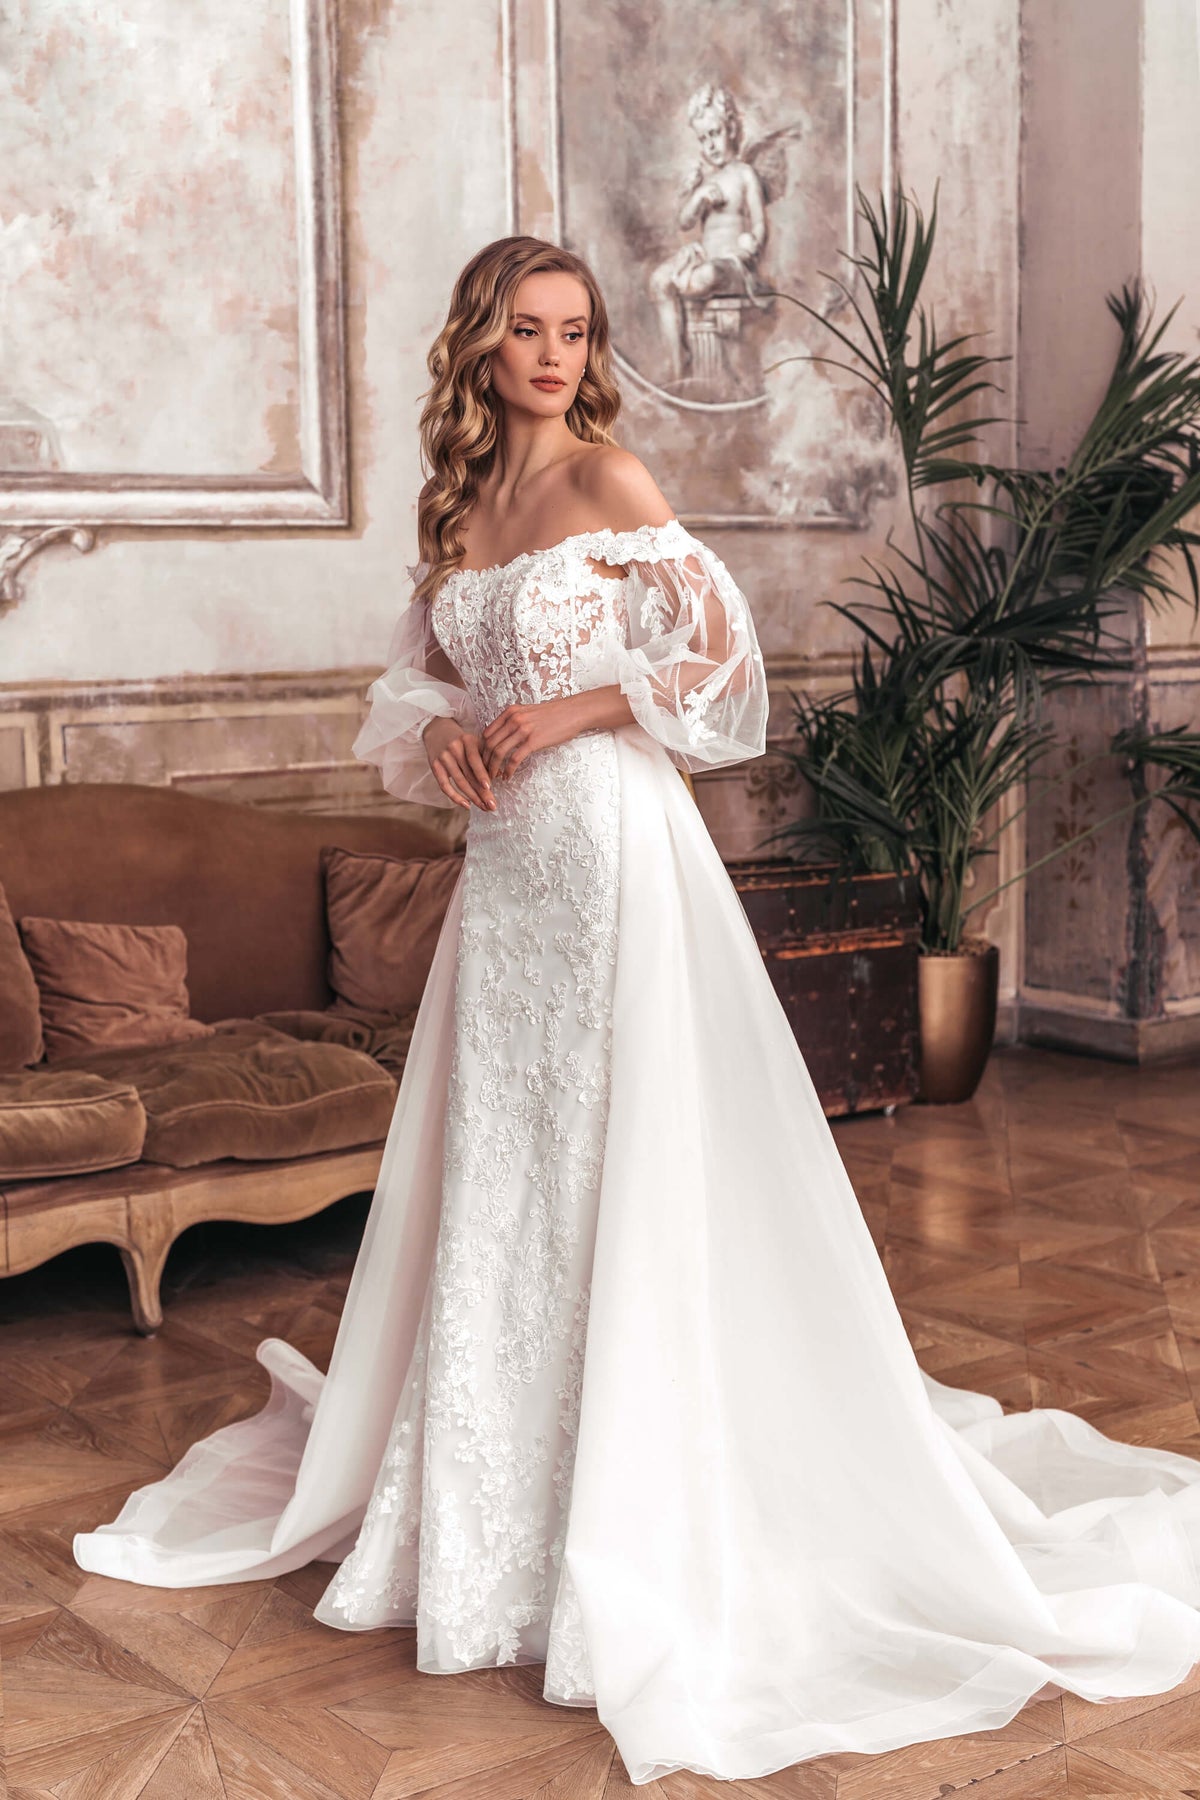 Original Mermaid Fit and Flare Detachable Long Puff Sleeves Wedding Dress Bridal Gown Detachable Train Transformer Design Off The Shoulder